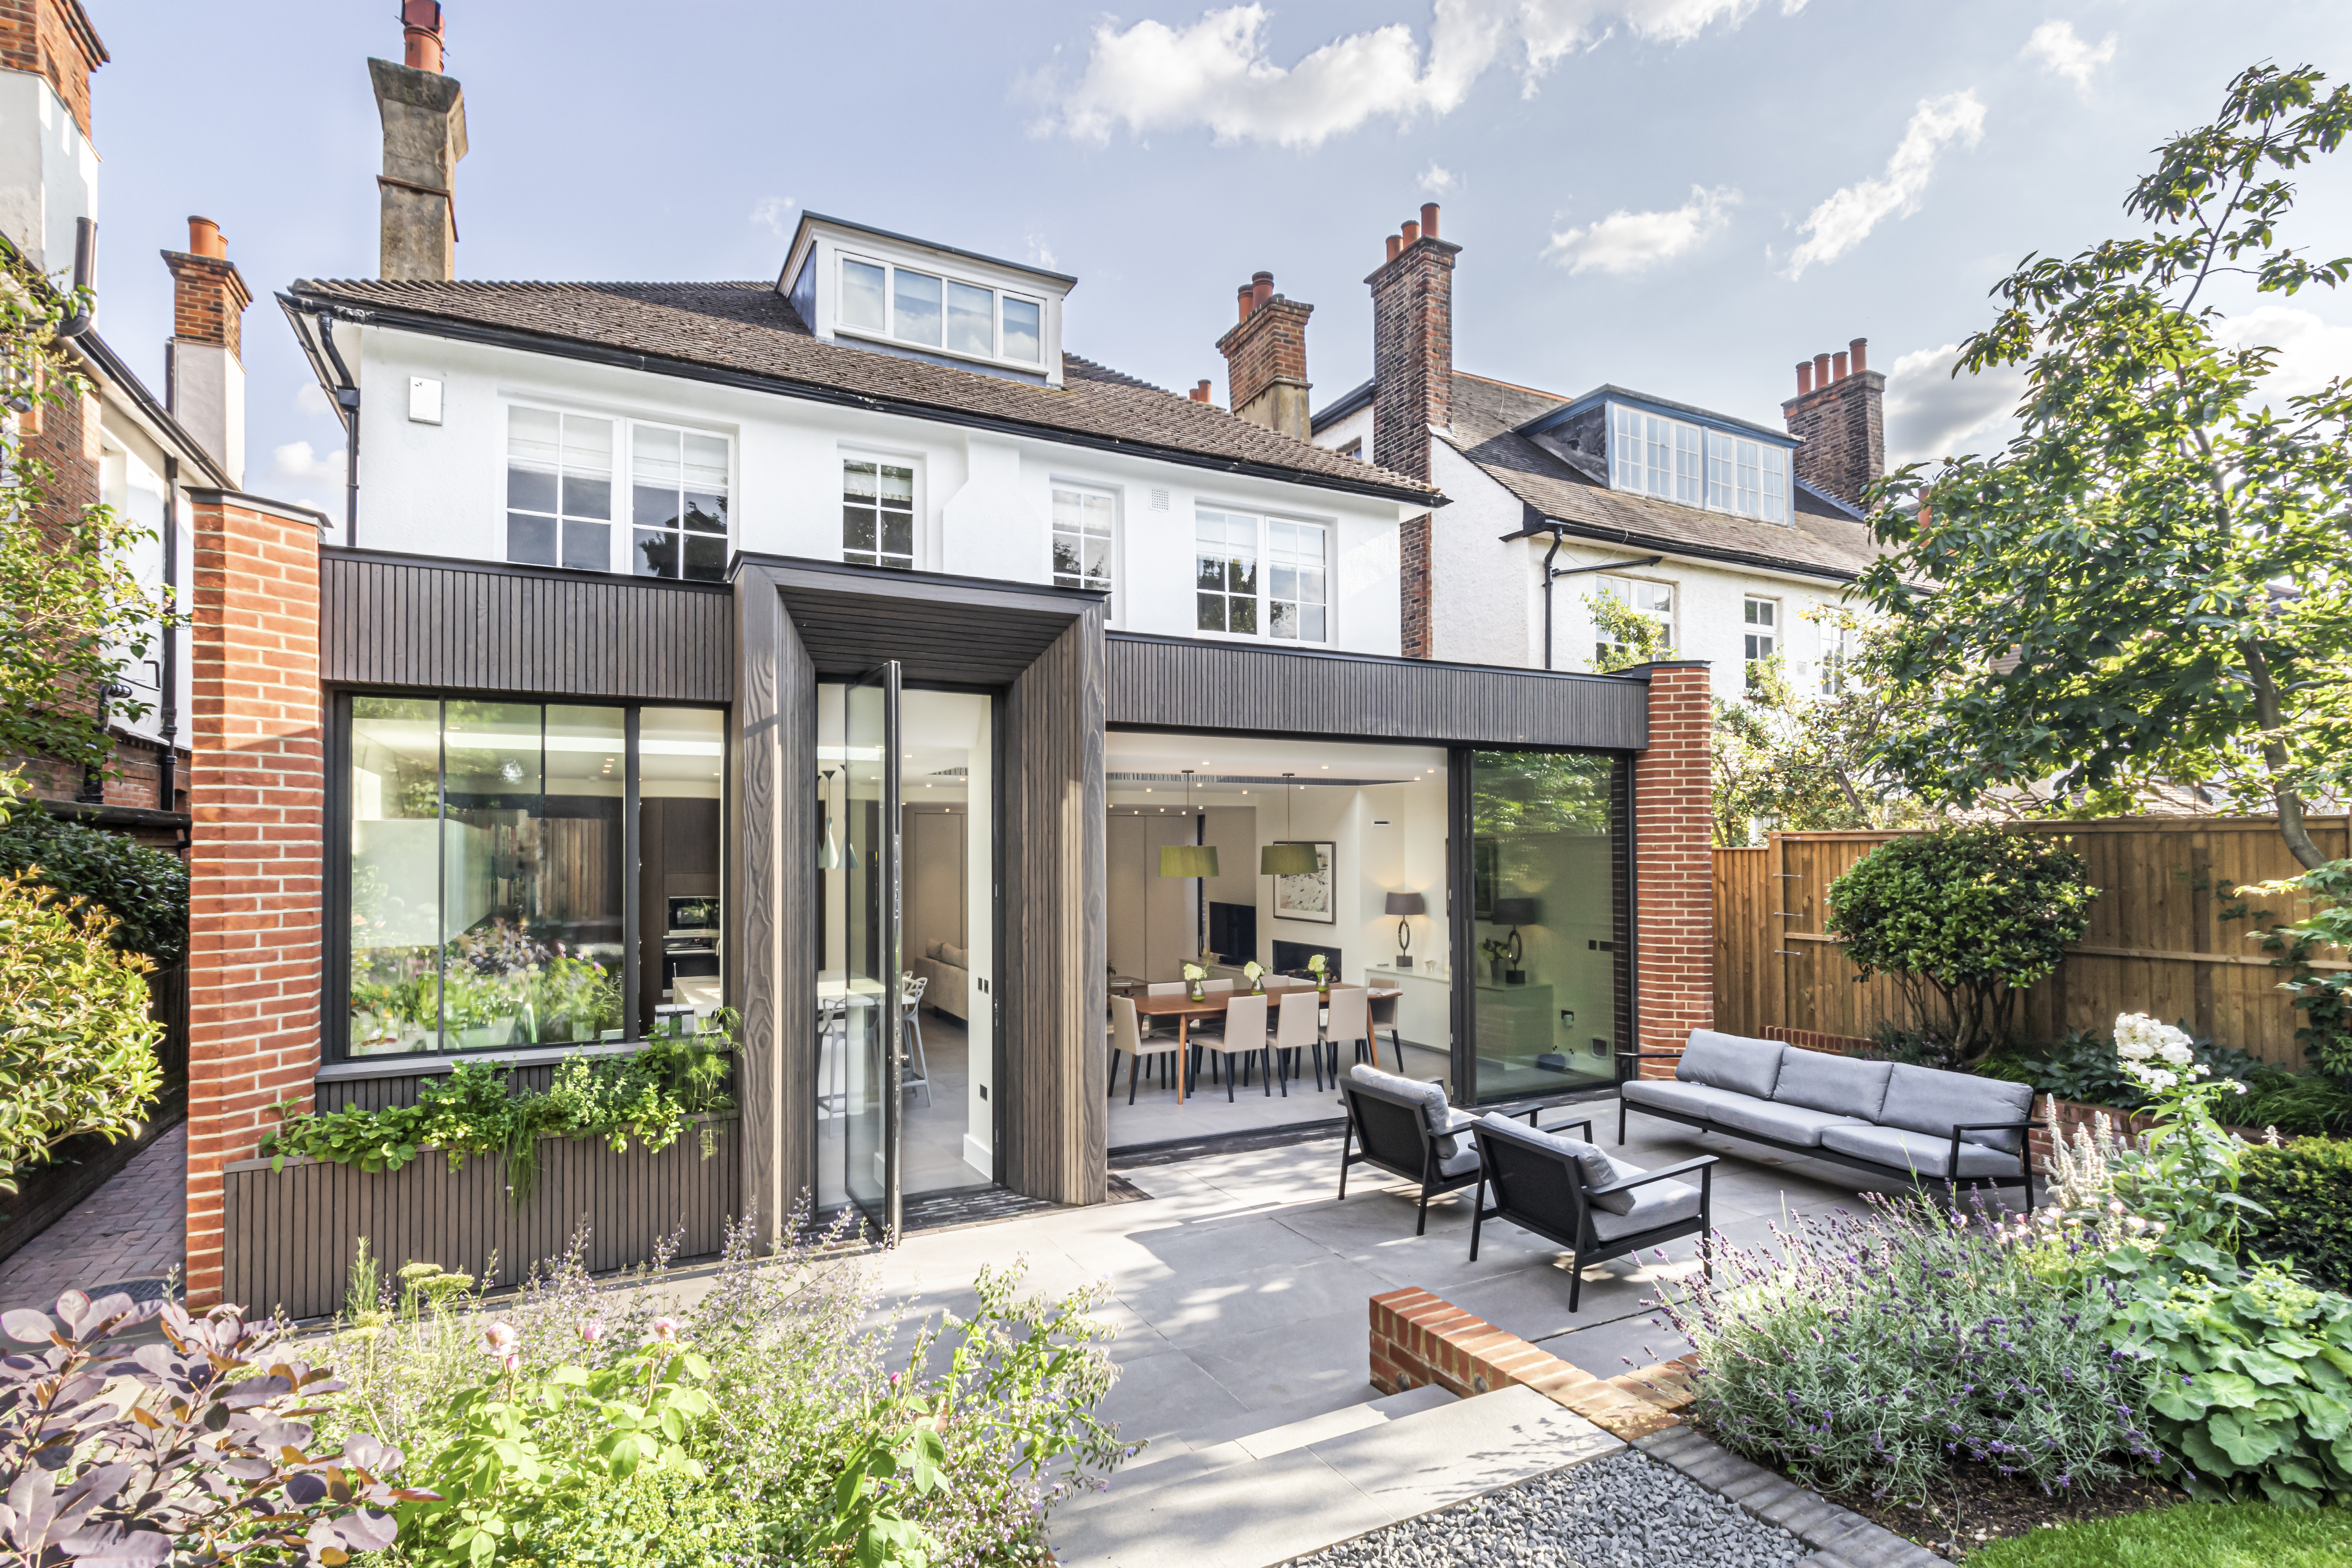 A Roehampton kitchen extension and full refurbishment of existing house